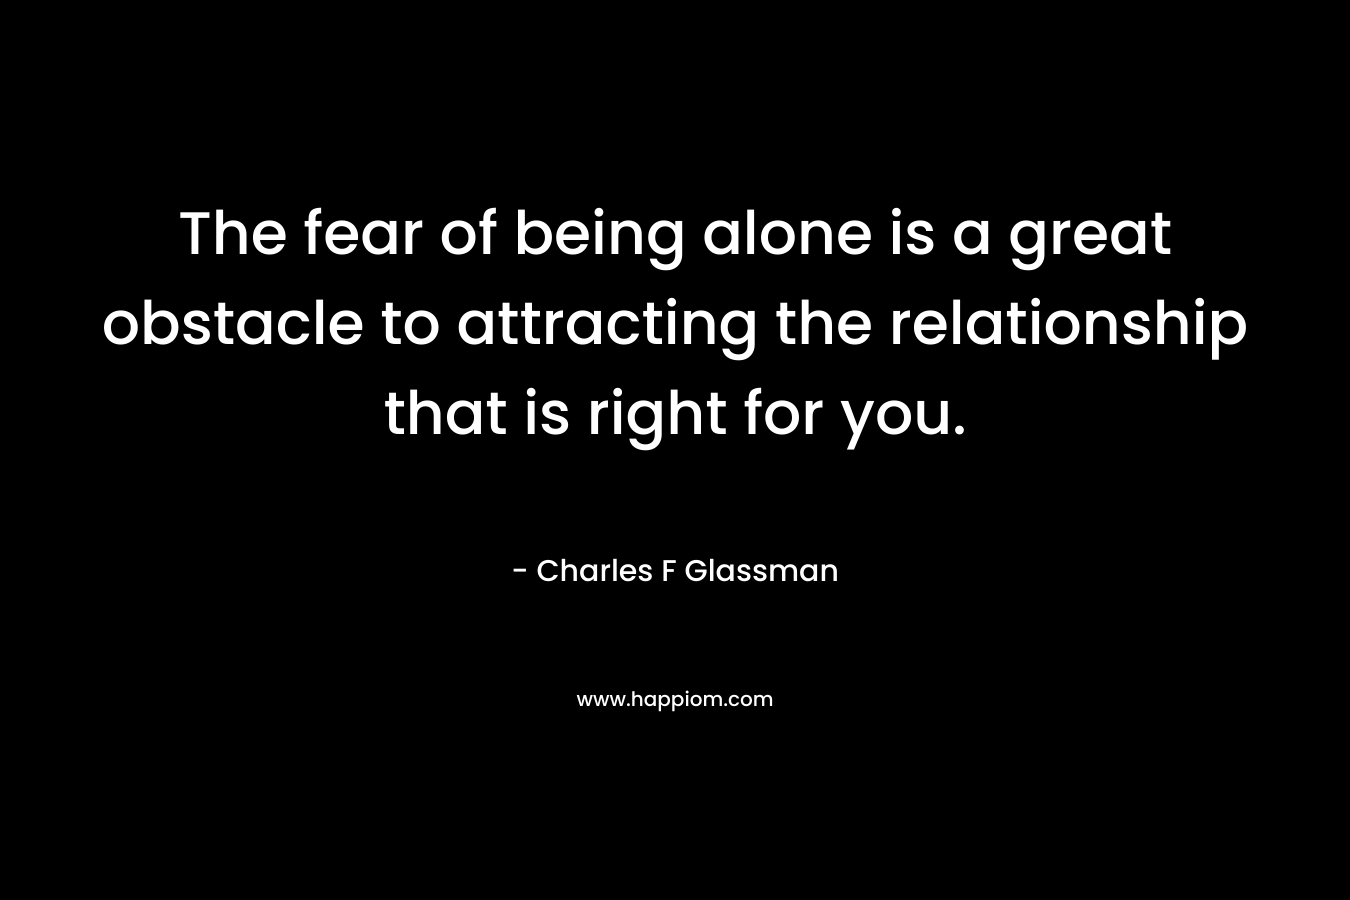 The fear of being alone is a great obstacle to attracting the relationship that is right for you.